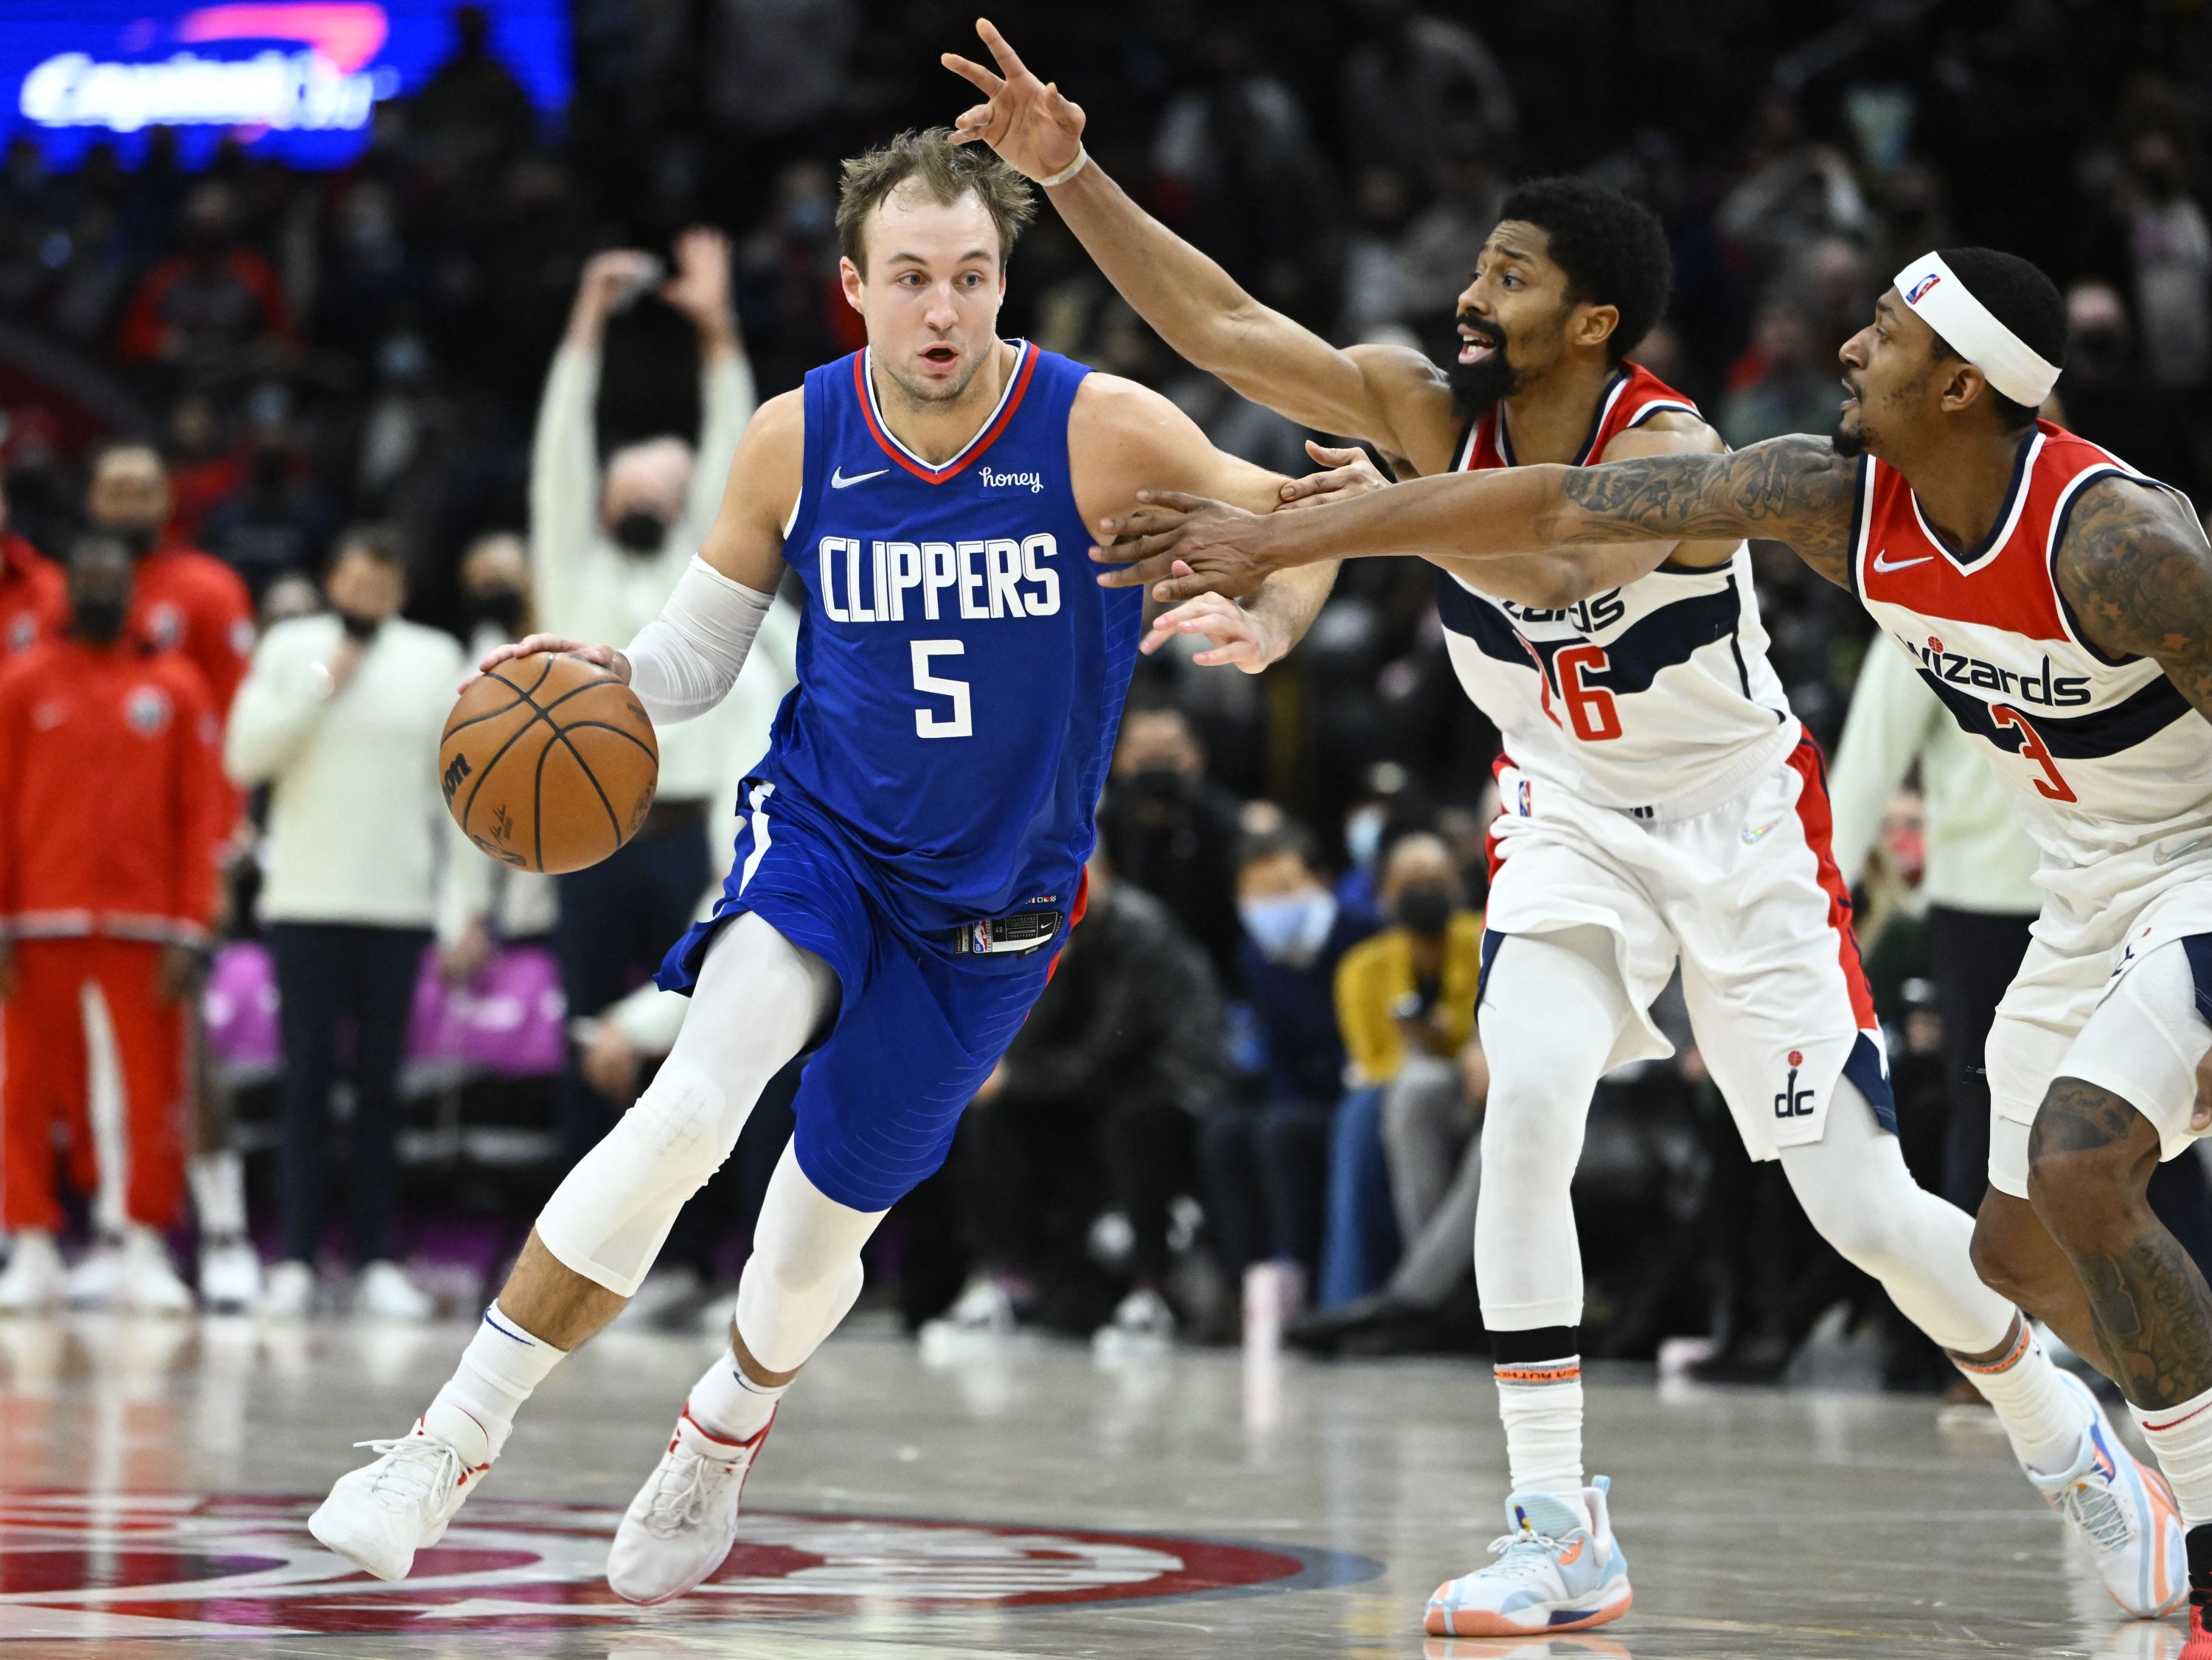 Clippers guard Luke Kennard (L) dribbles the ball as Washington Wizards' Spencer Dinwiddie (C) and guard Bradley Beal (R) defend Washington, D.C., U.S., Jan 25, 2022. (Reuters Photo)